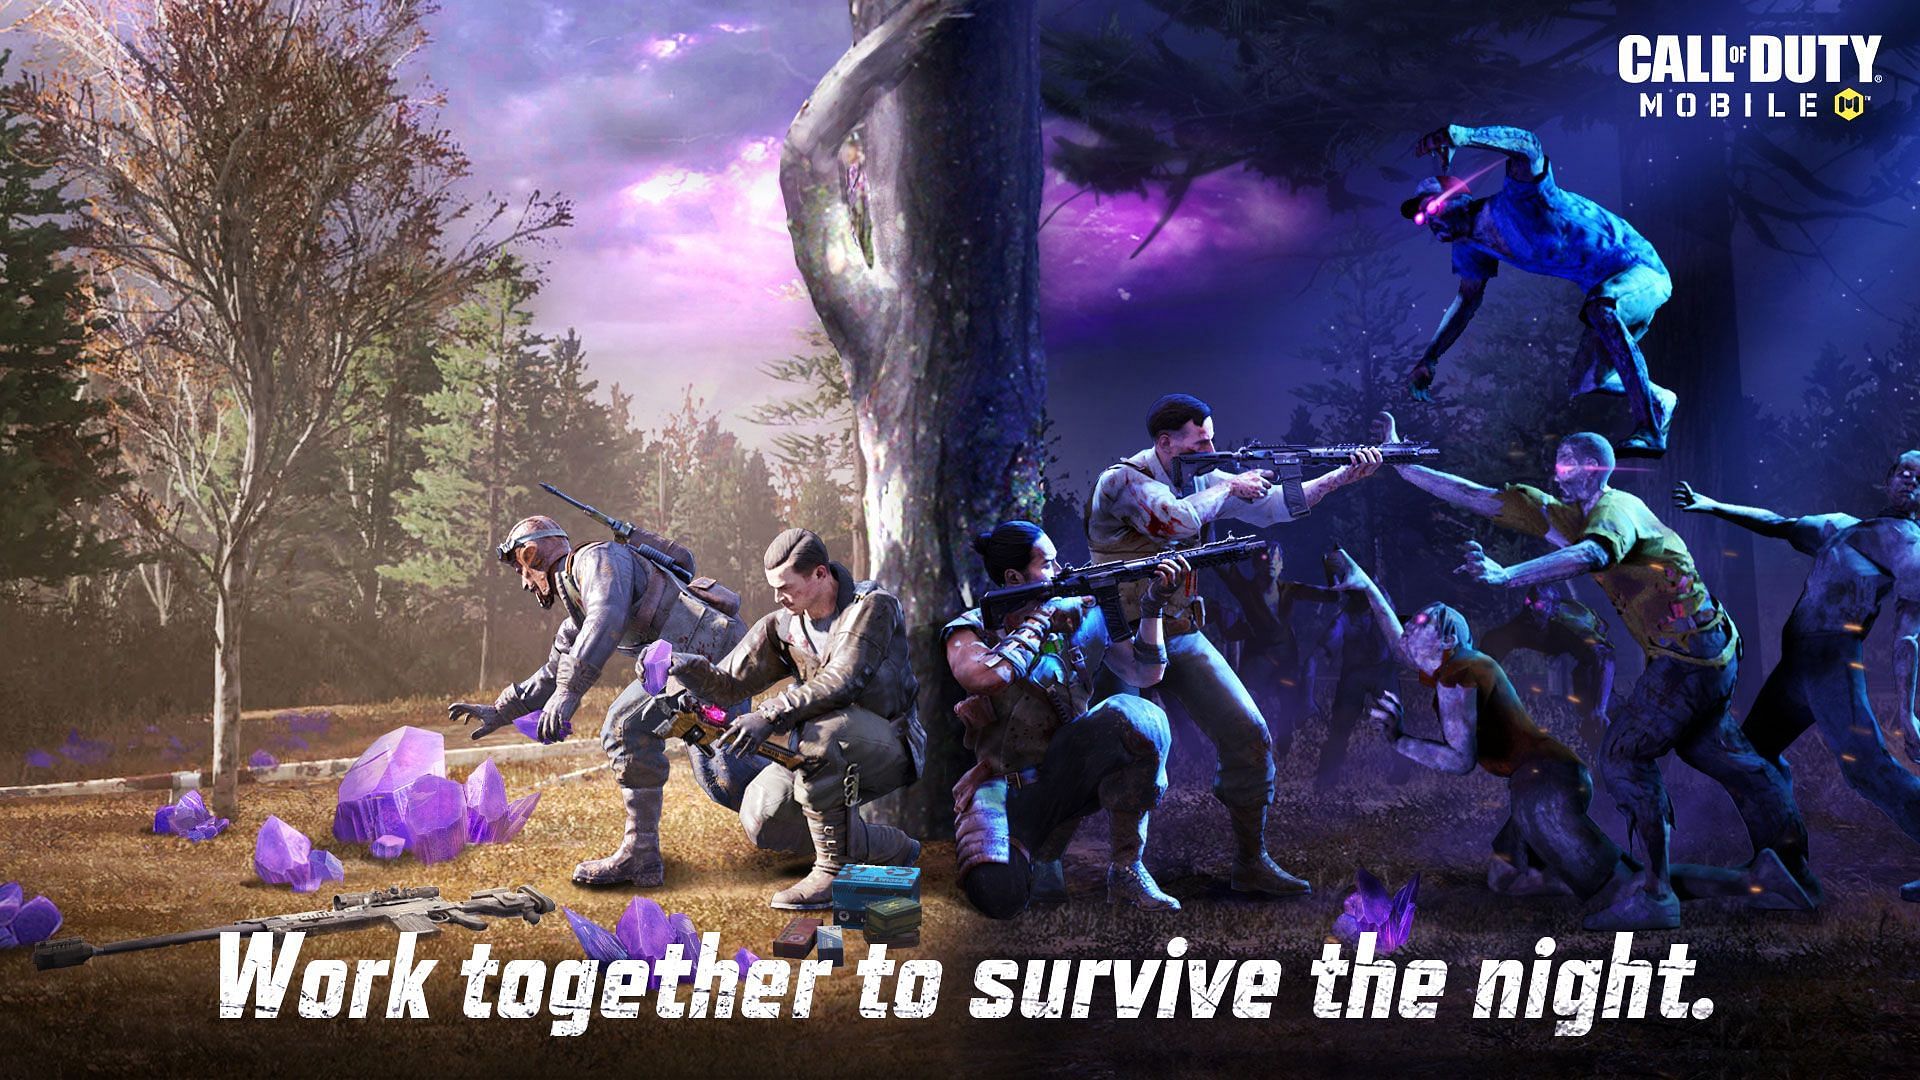 Call of Duty® Mobile: The Scavenger's Guide to Solstice Awakened